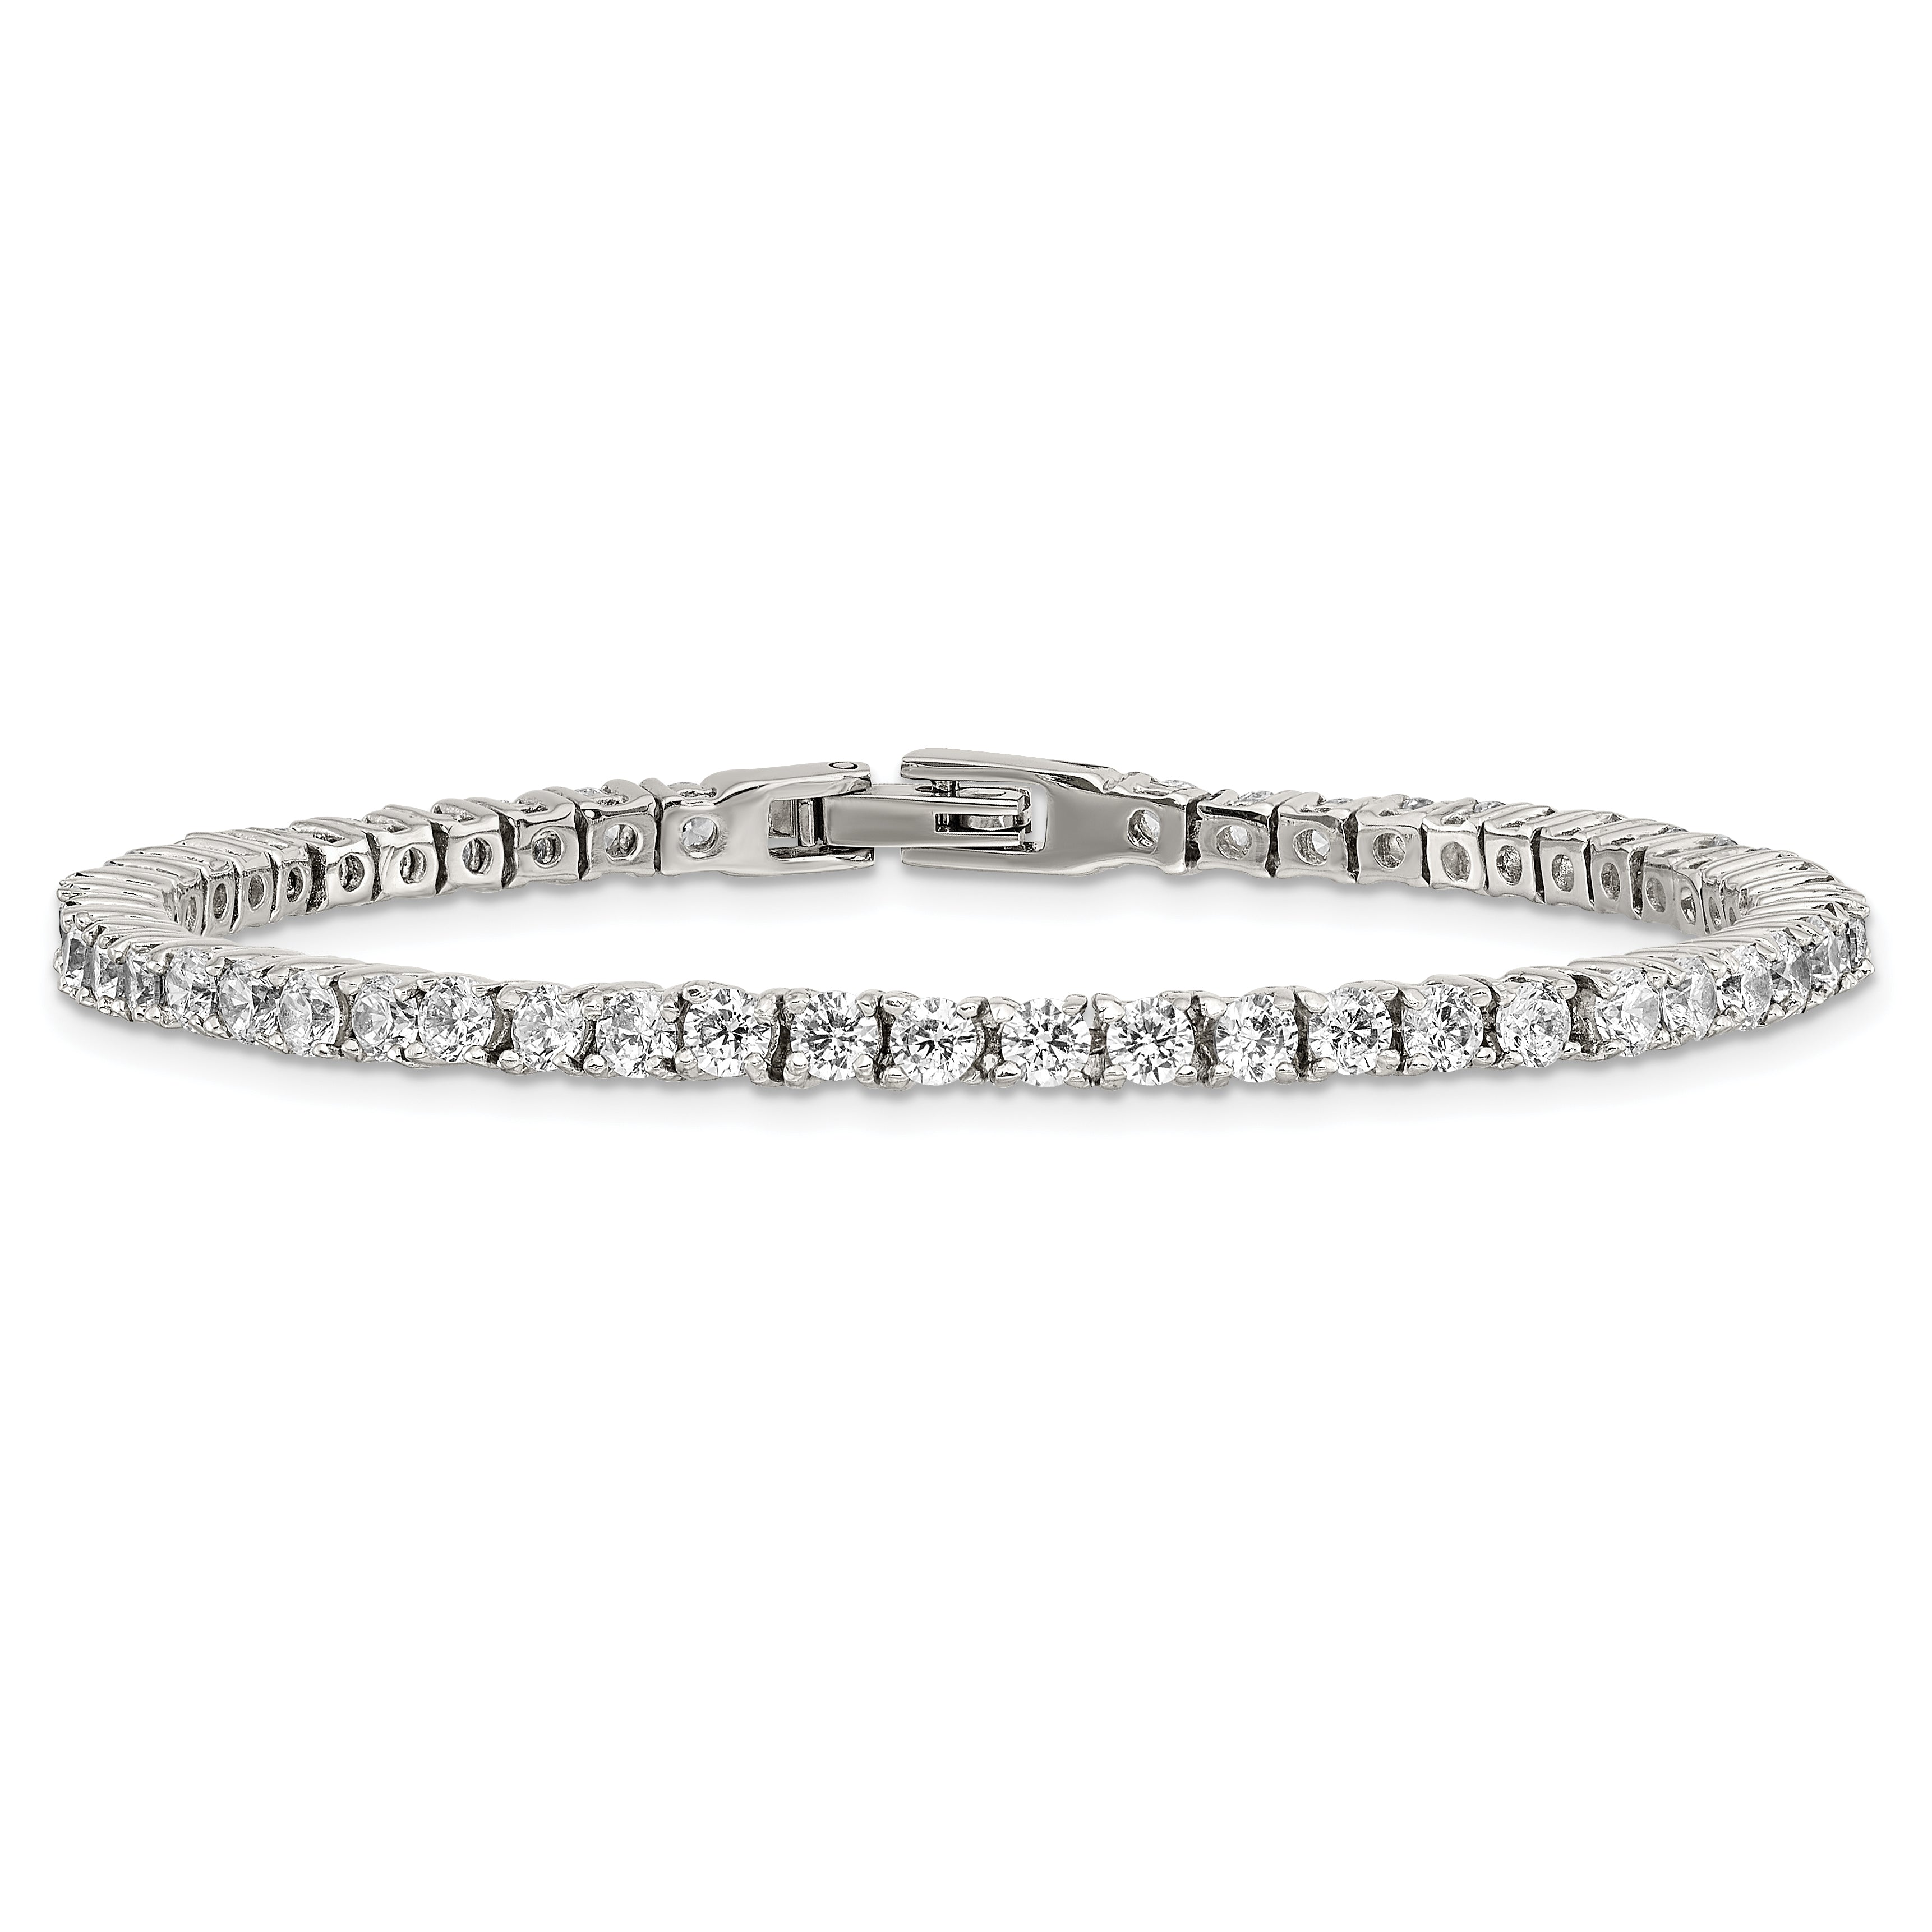 Chisel Stainless Steel Polished CZ 7.5 inch Tennis Bracelet